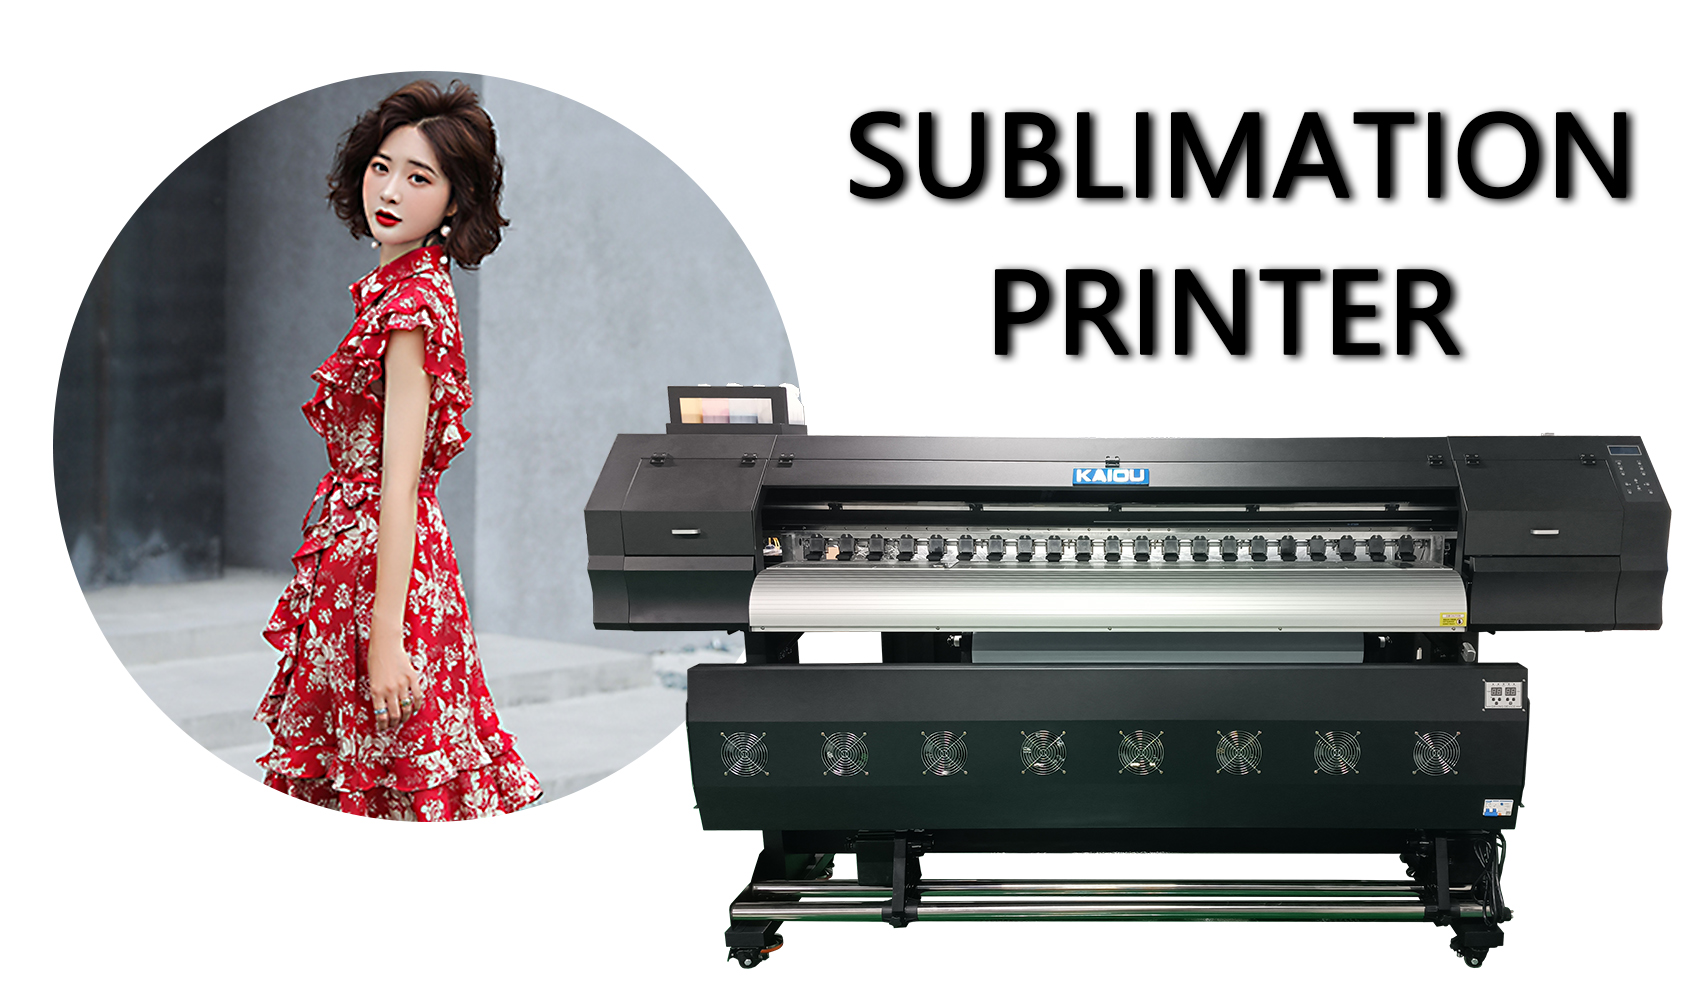 Technology and Development of Sublimation Printer